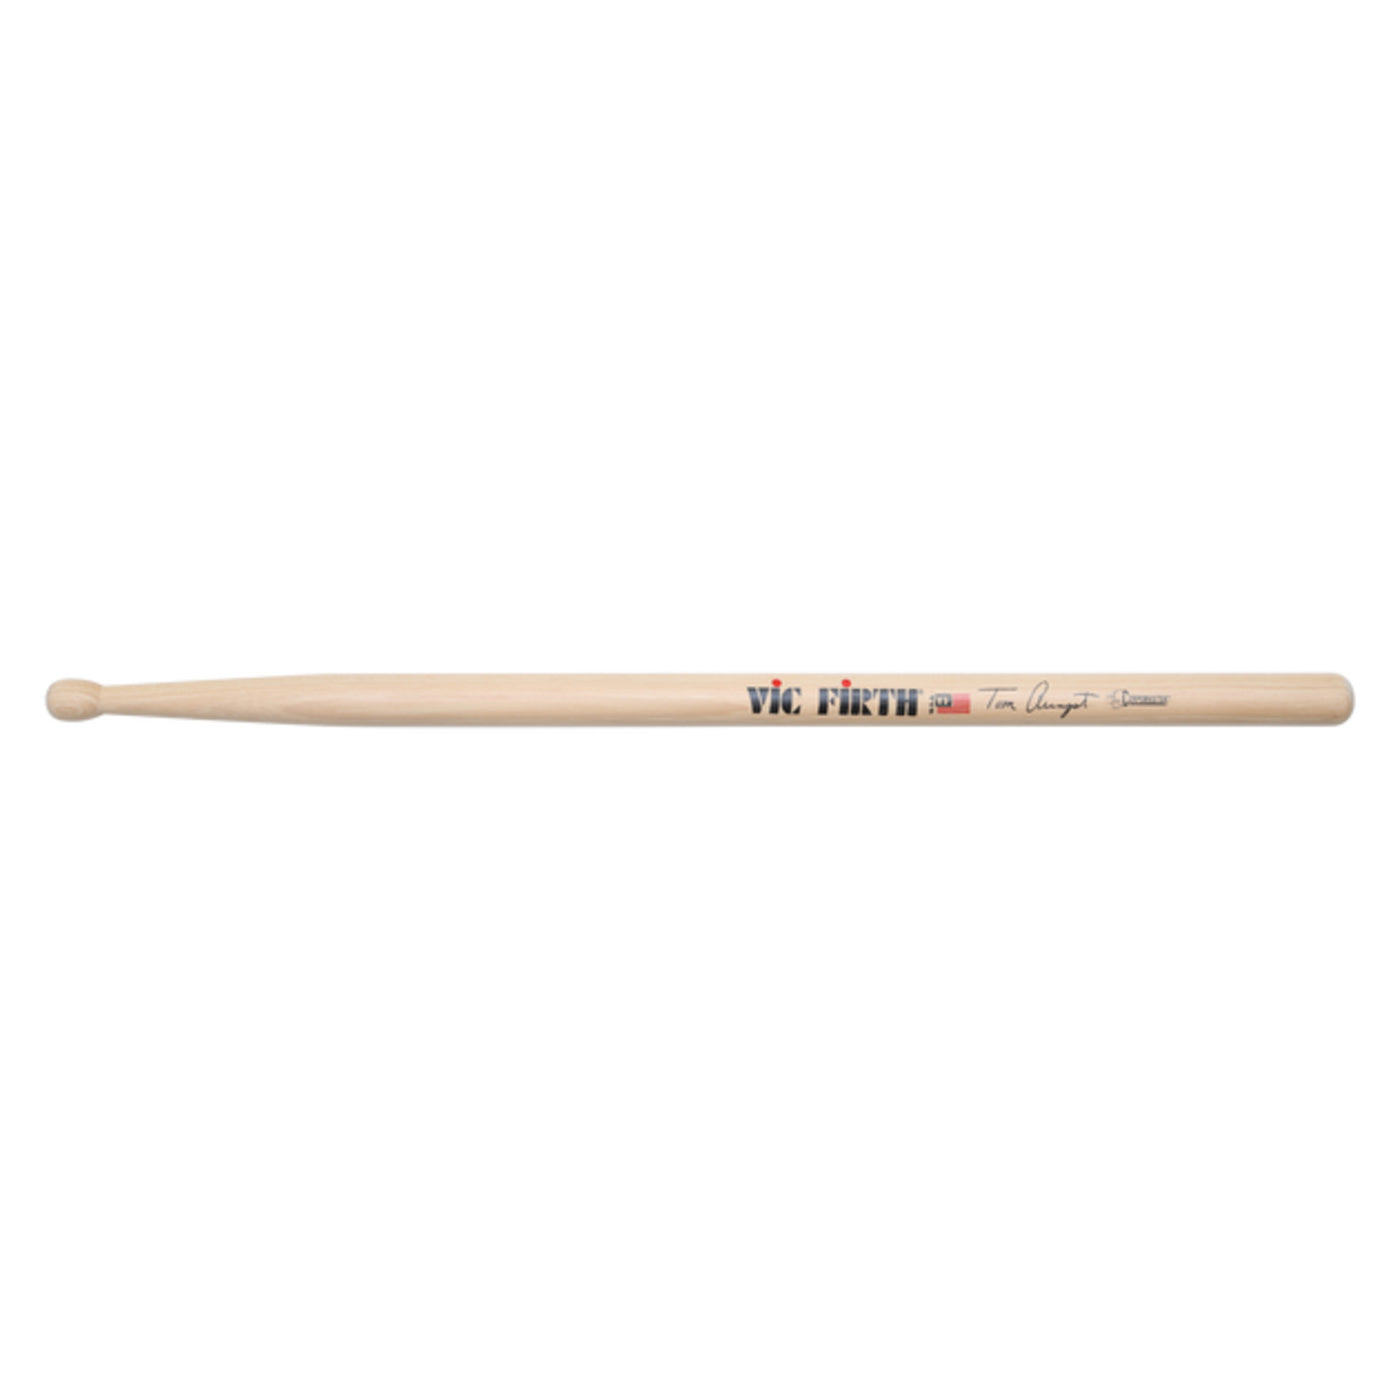 Vic Firth Corpsmaster Signature Snare - Tom Aungst Drumstick (STA)